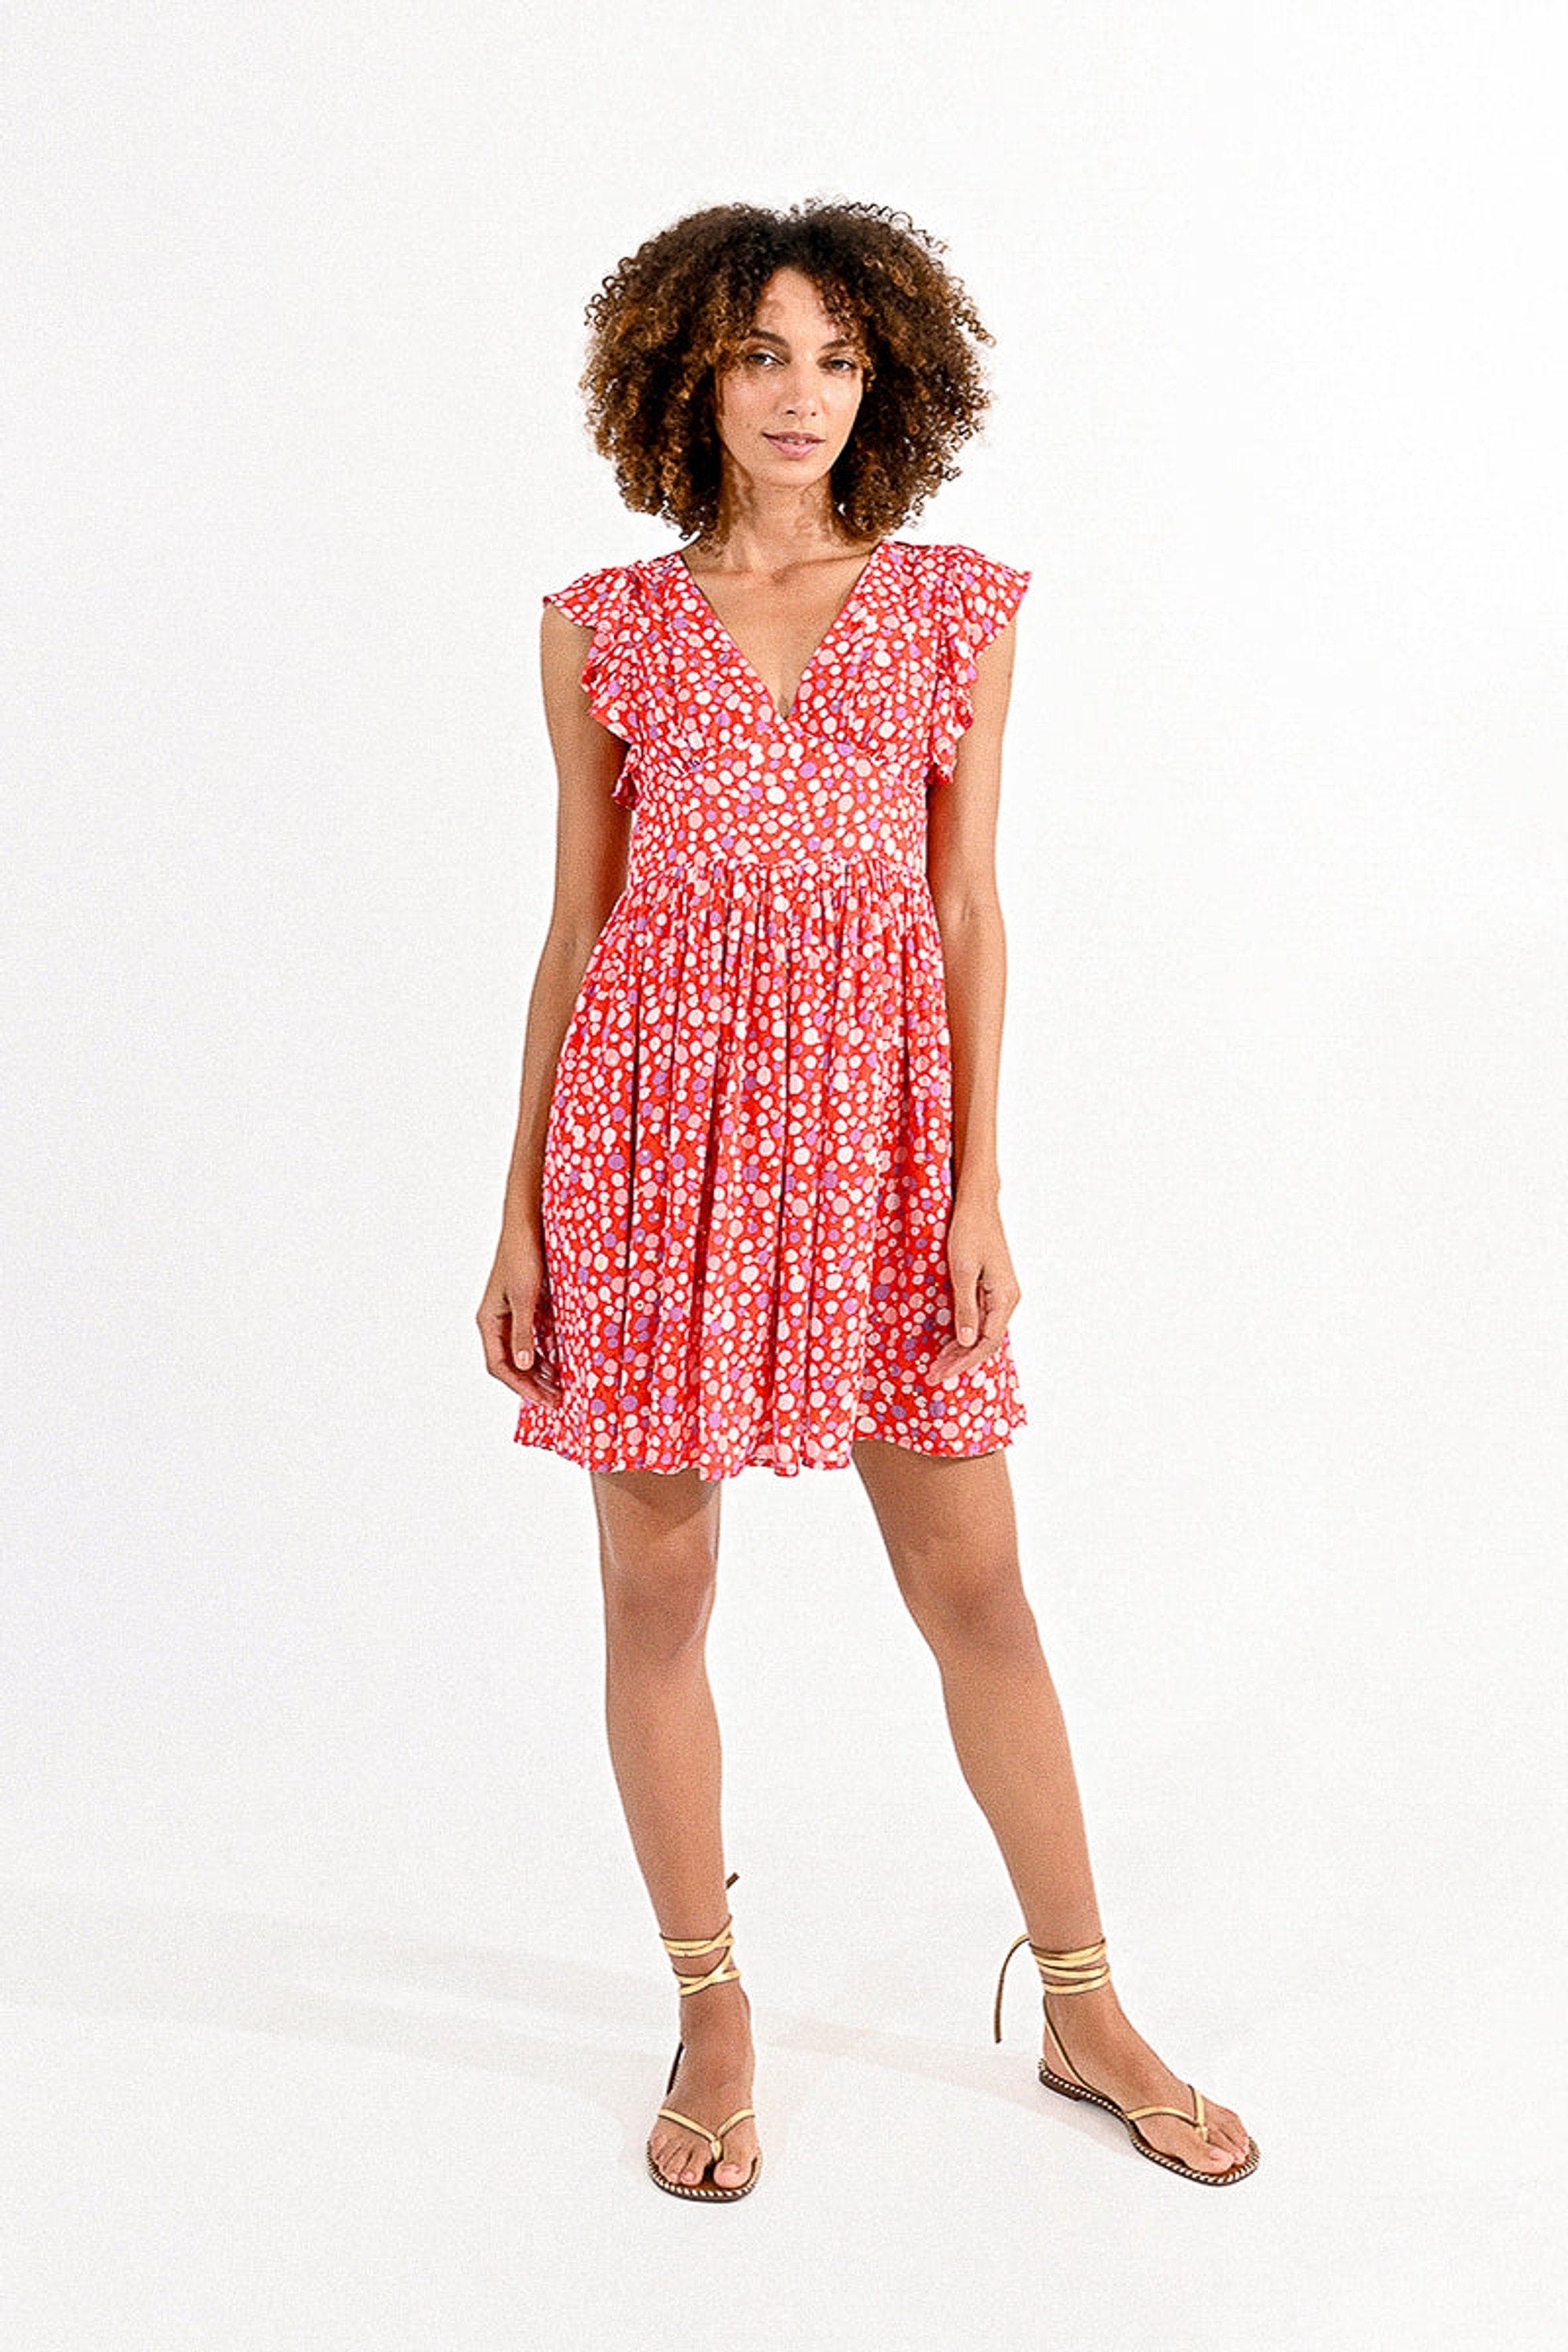 Molly Bracken Dress in Red Charlotte - clever alice